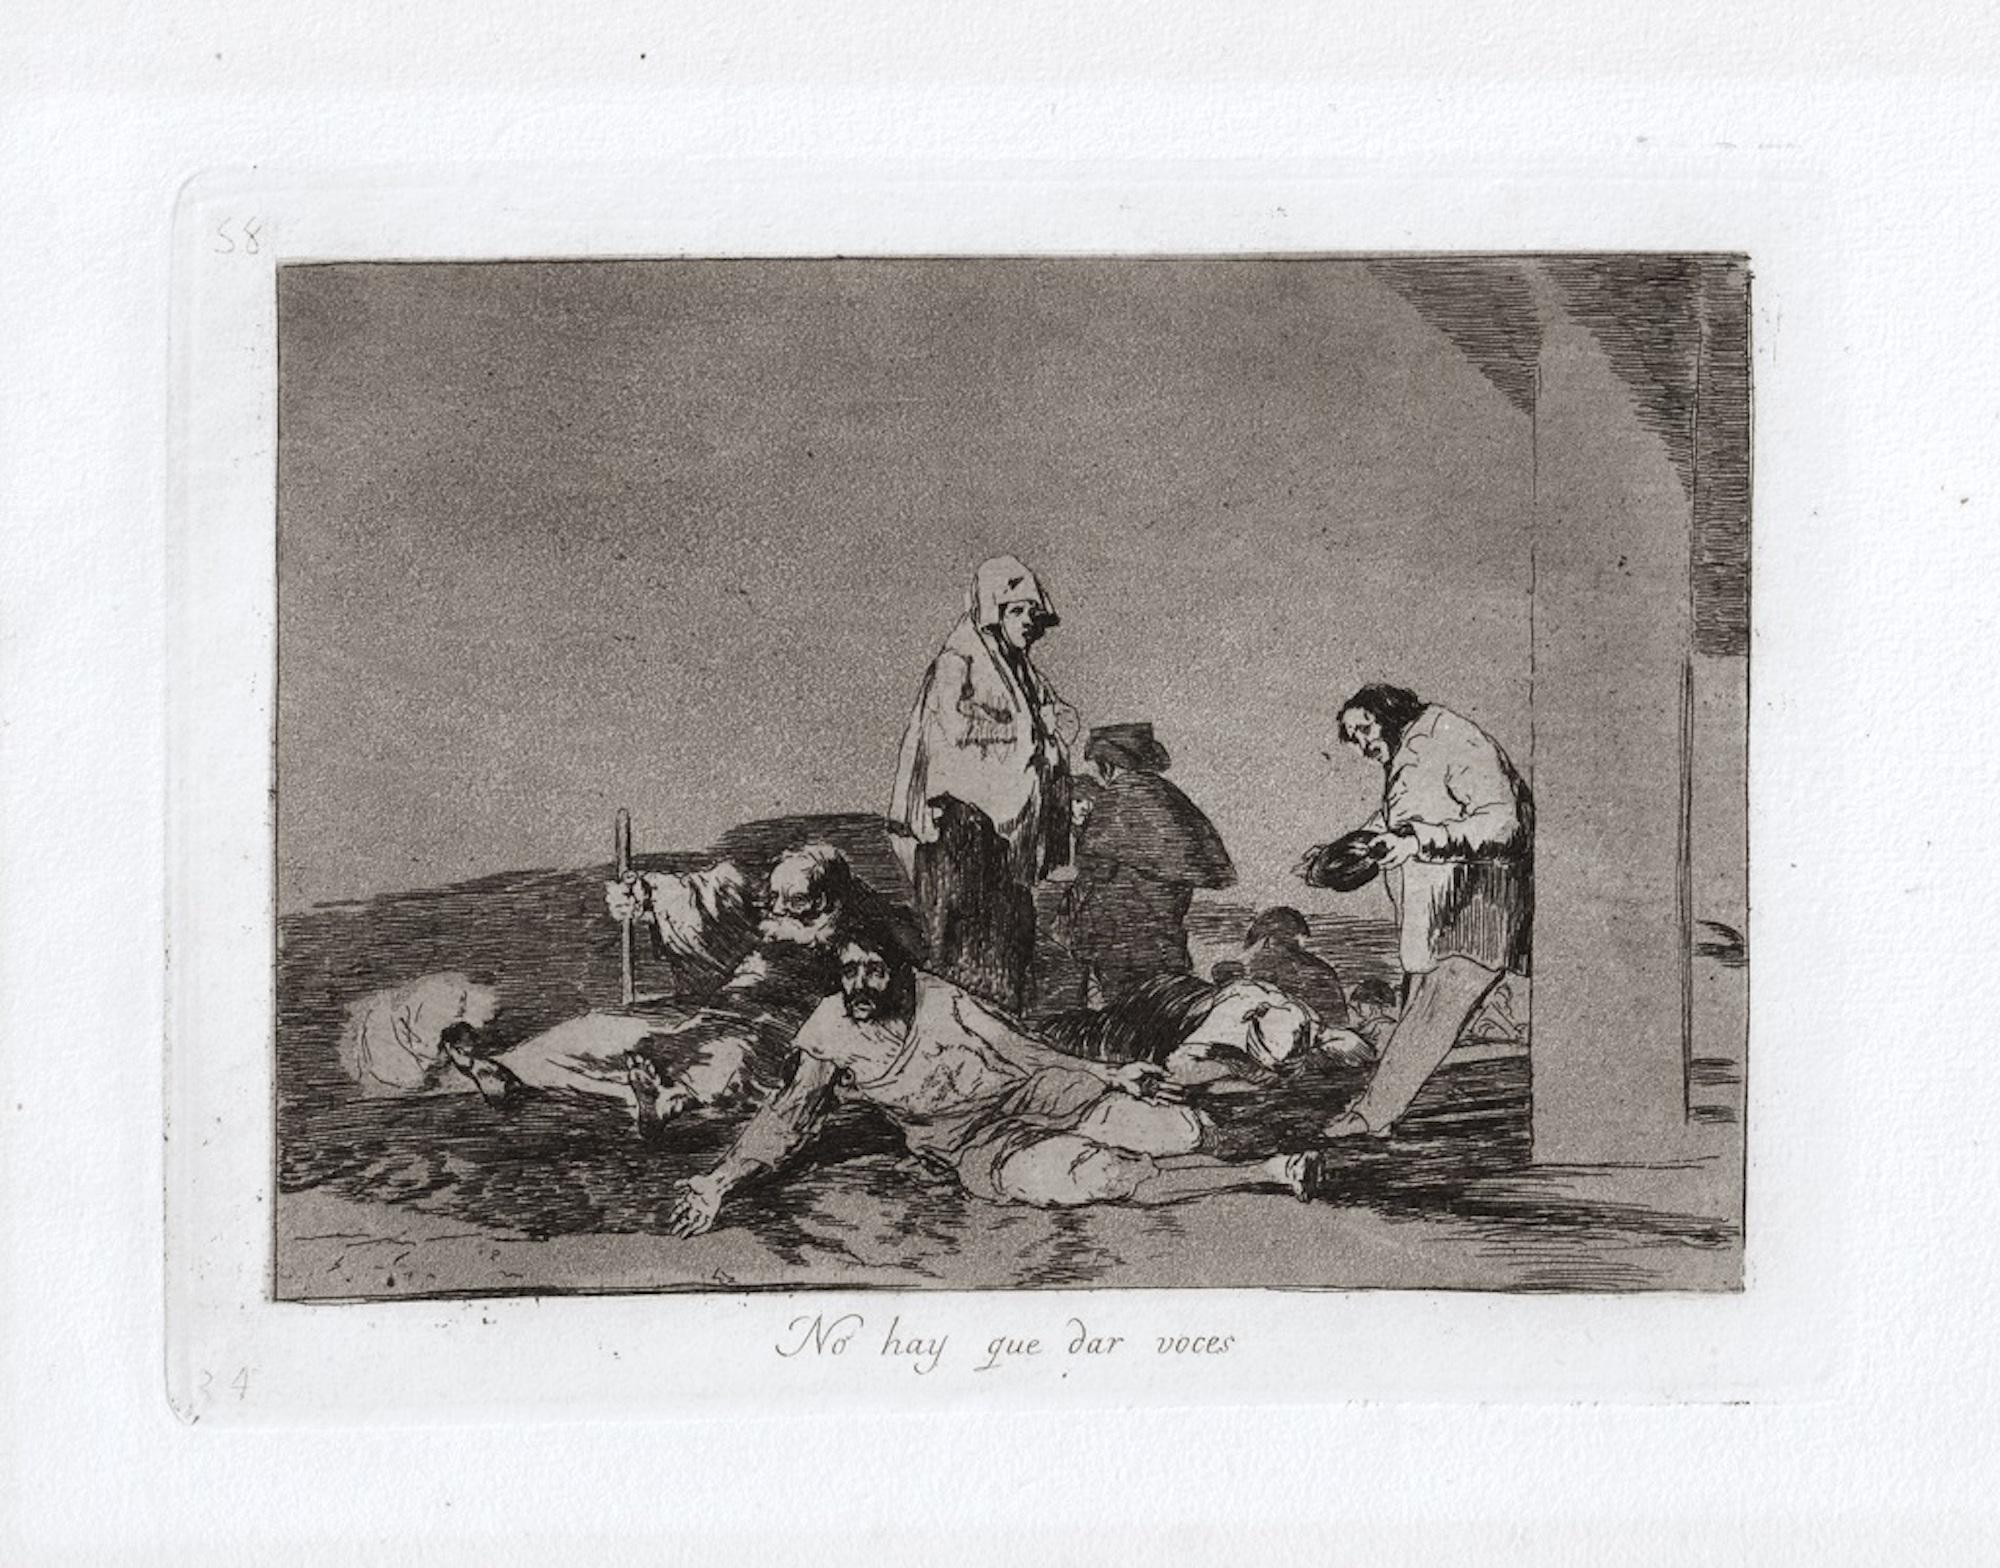 No hay que dar Voces is an original artwork realized by the great Spanish artist Francisco Goya in 1810. 

Original Etching on paper. 

The artwork belongs to the famous series "Los Desastres de la Guerra" realized during the years of the